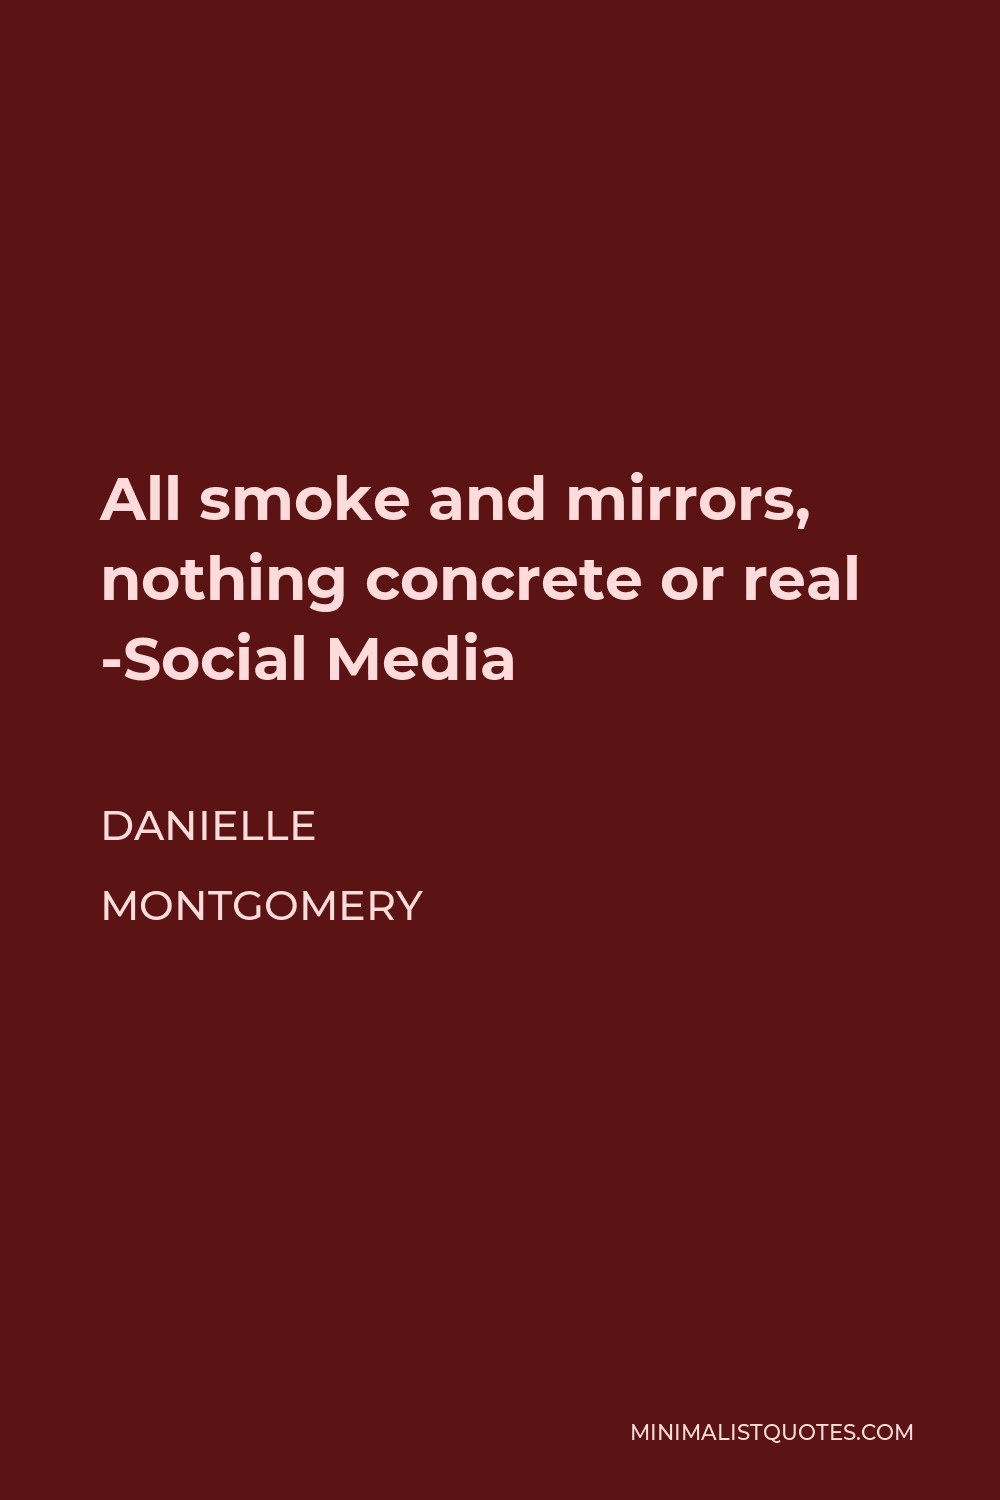 Danielle Montgomery Quote - All smoke and mirrors, nothing concrete or real -Social Media